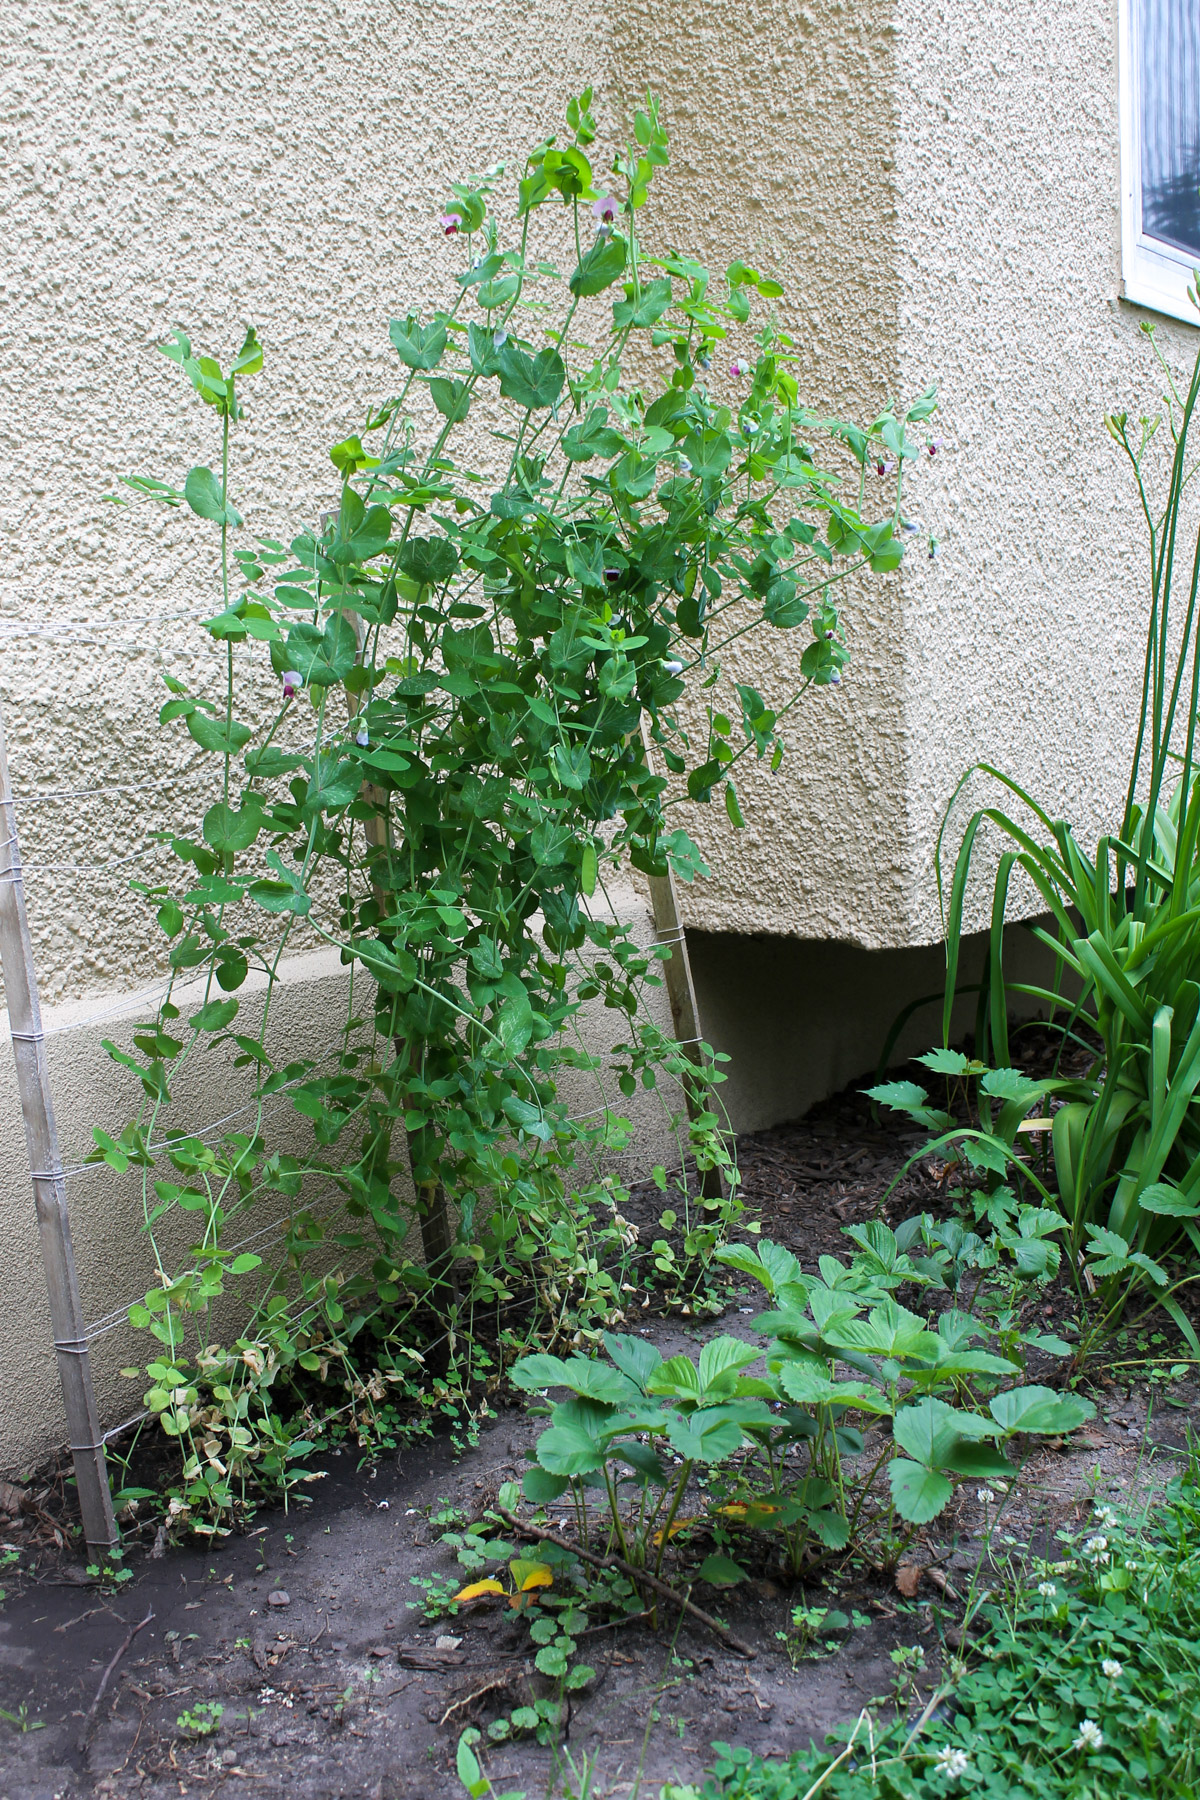 Peas growing up a trellis on the side of a house with strawberry plants in front.